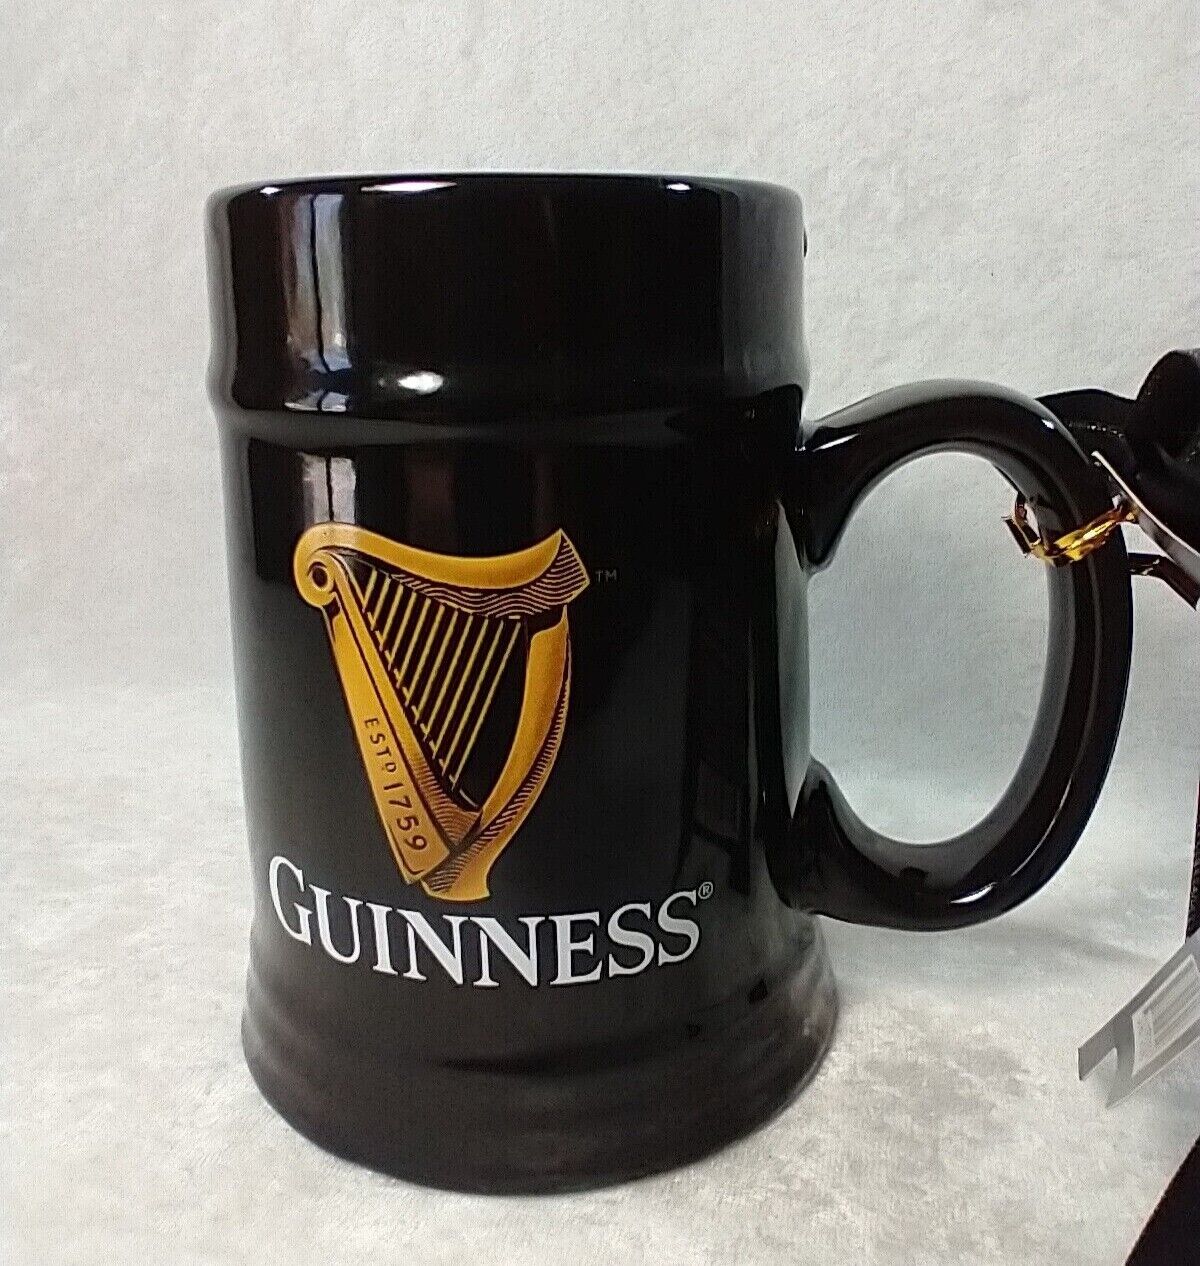 Guinness Black Ceramic Beer Mug/Stein With Harp Logo 18 OZ NEW WITH TAG